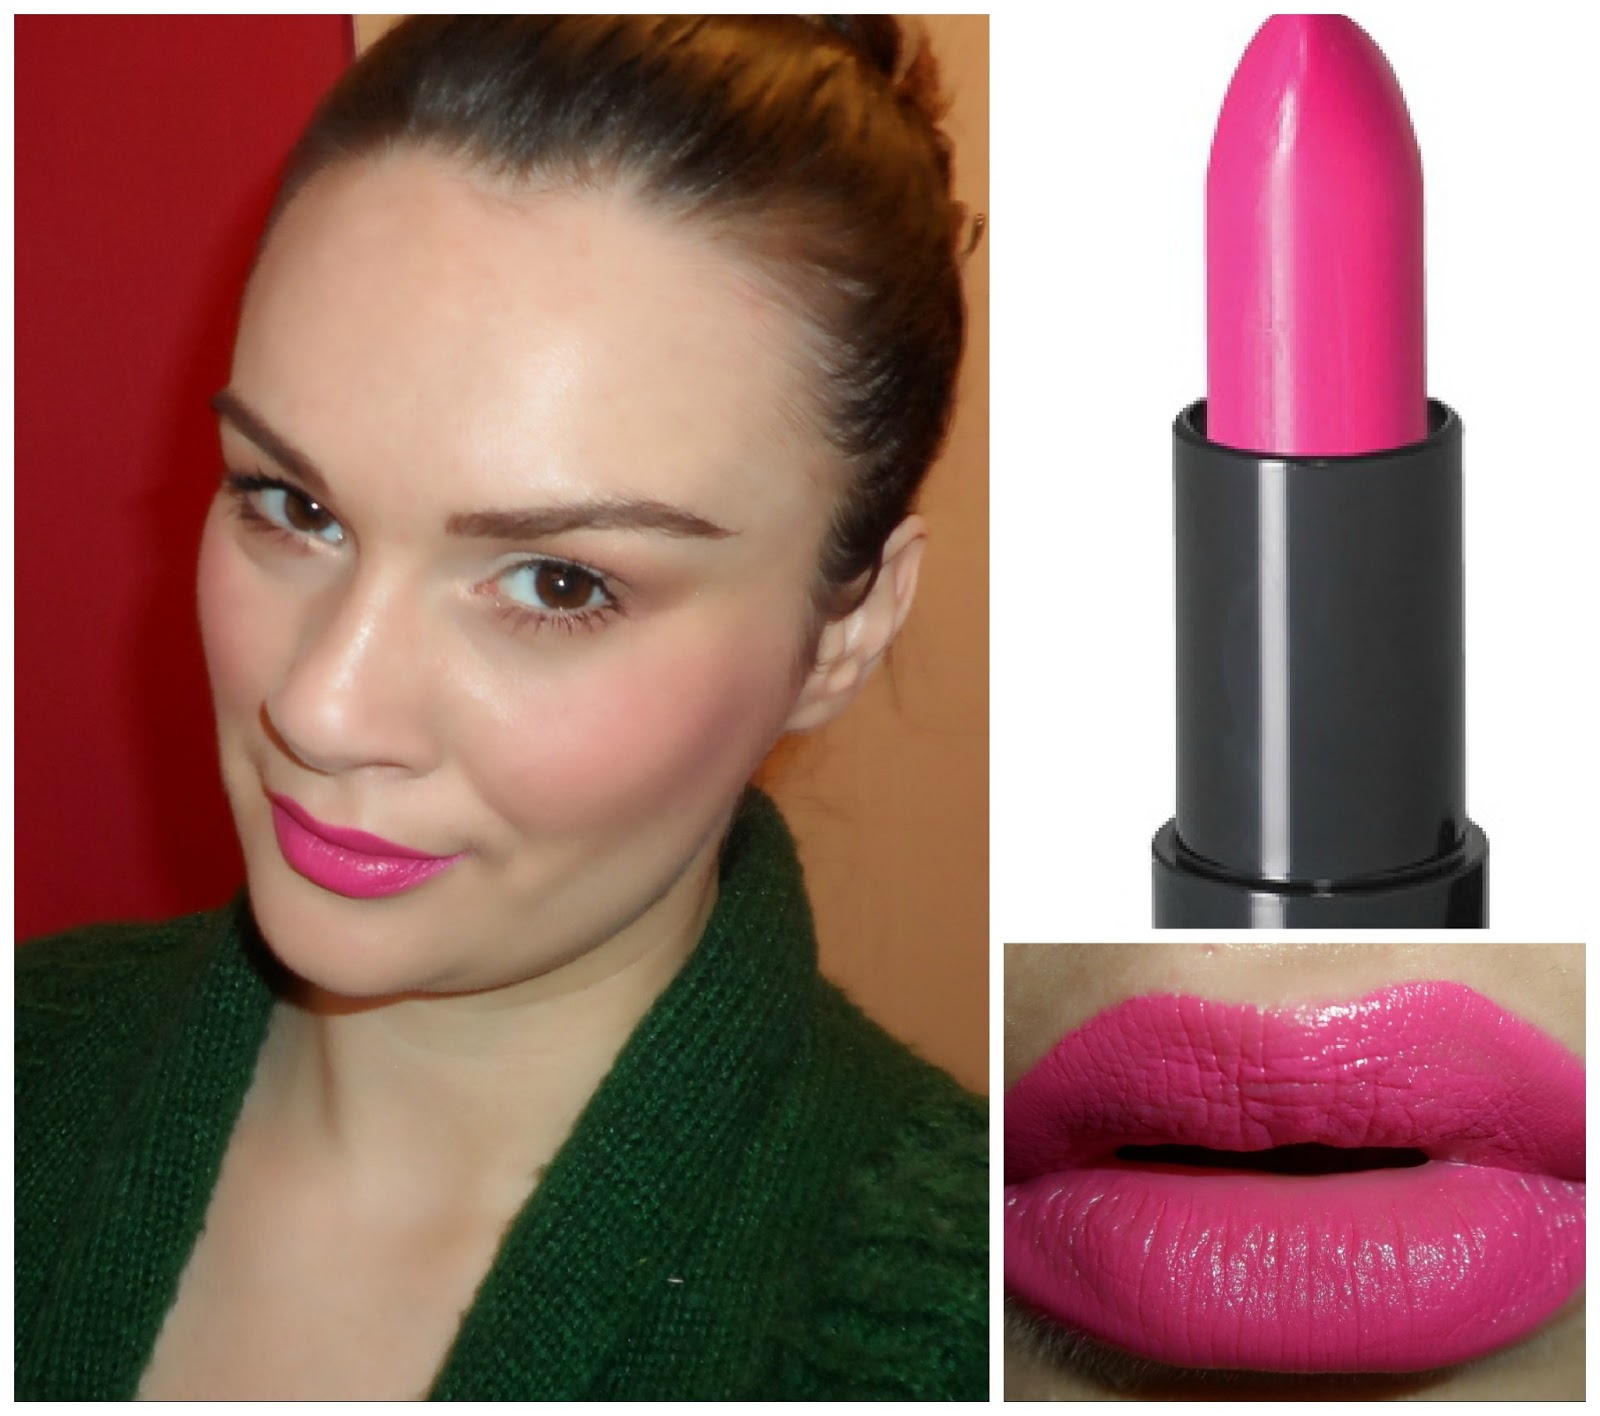 Deltage Drik Sodavand beautiful me plus you: Lasting Finish Lipstick by Kate Moss - Review